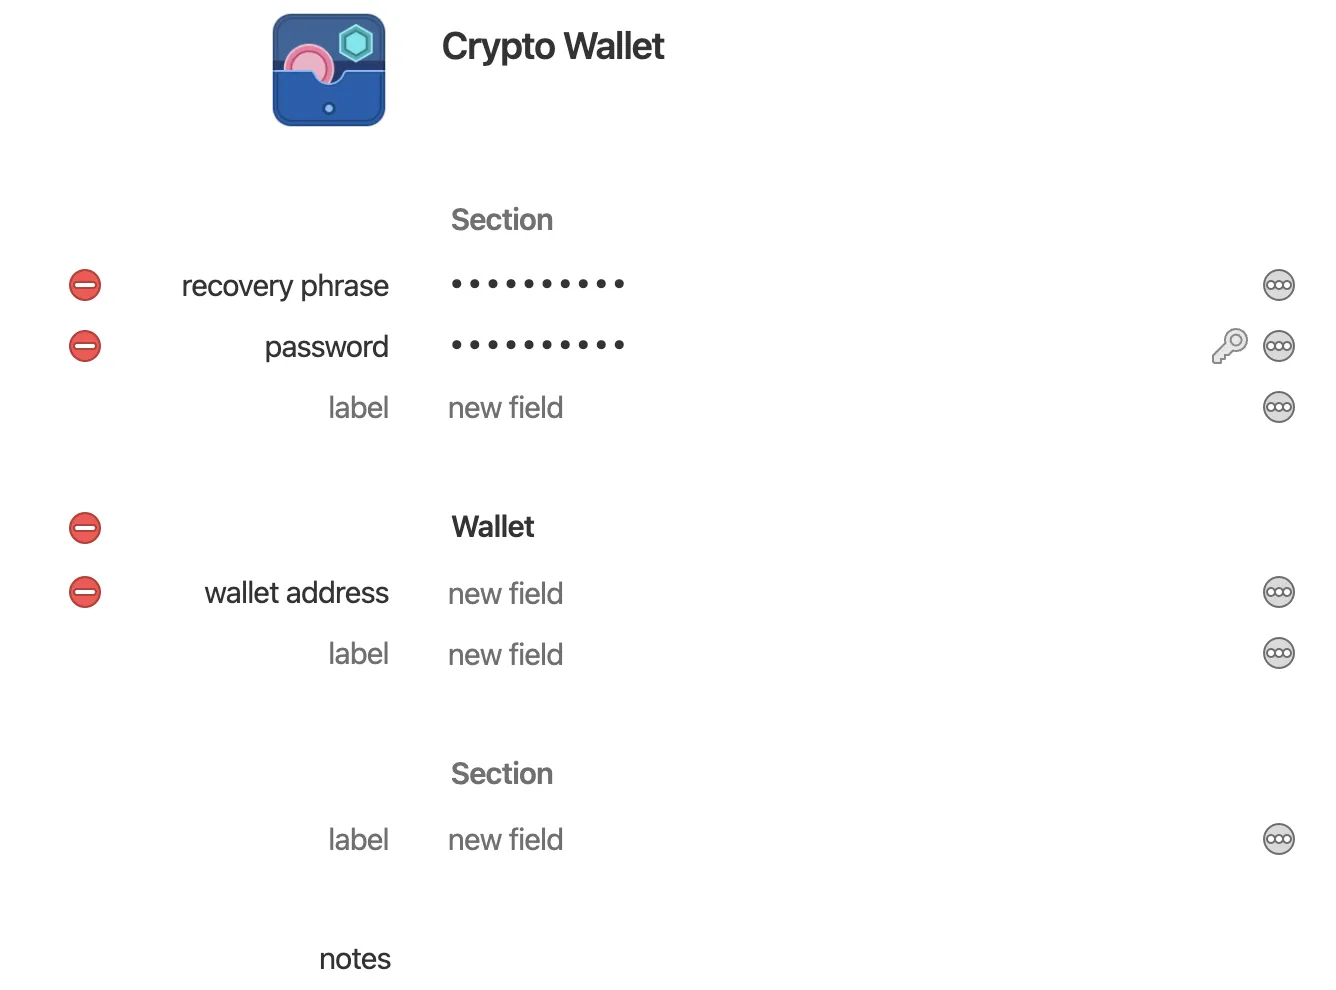 You may now effortlessly store crypto wallet details in 1Password